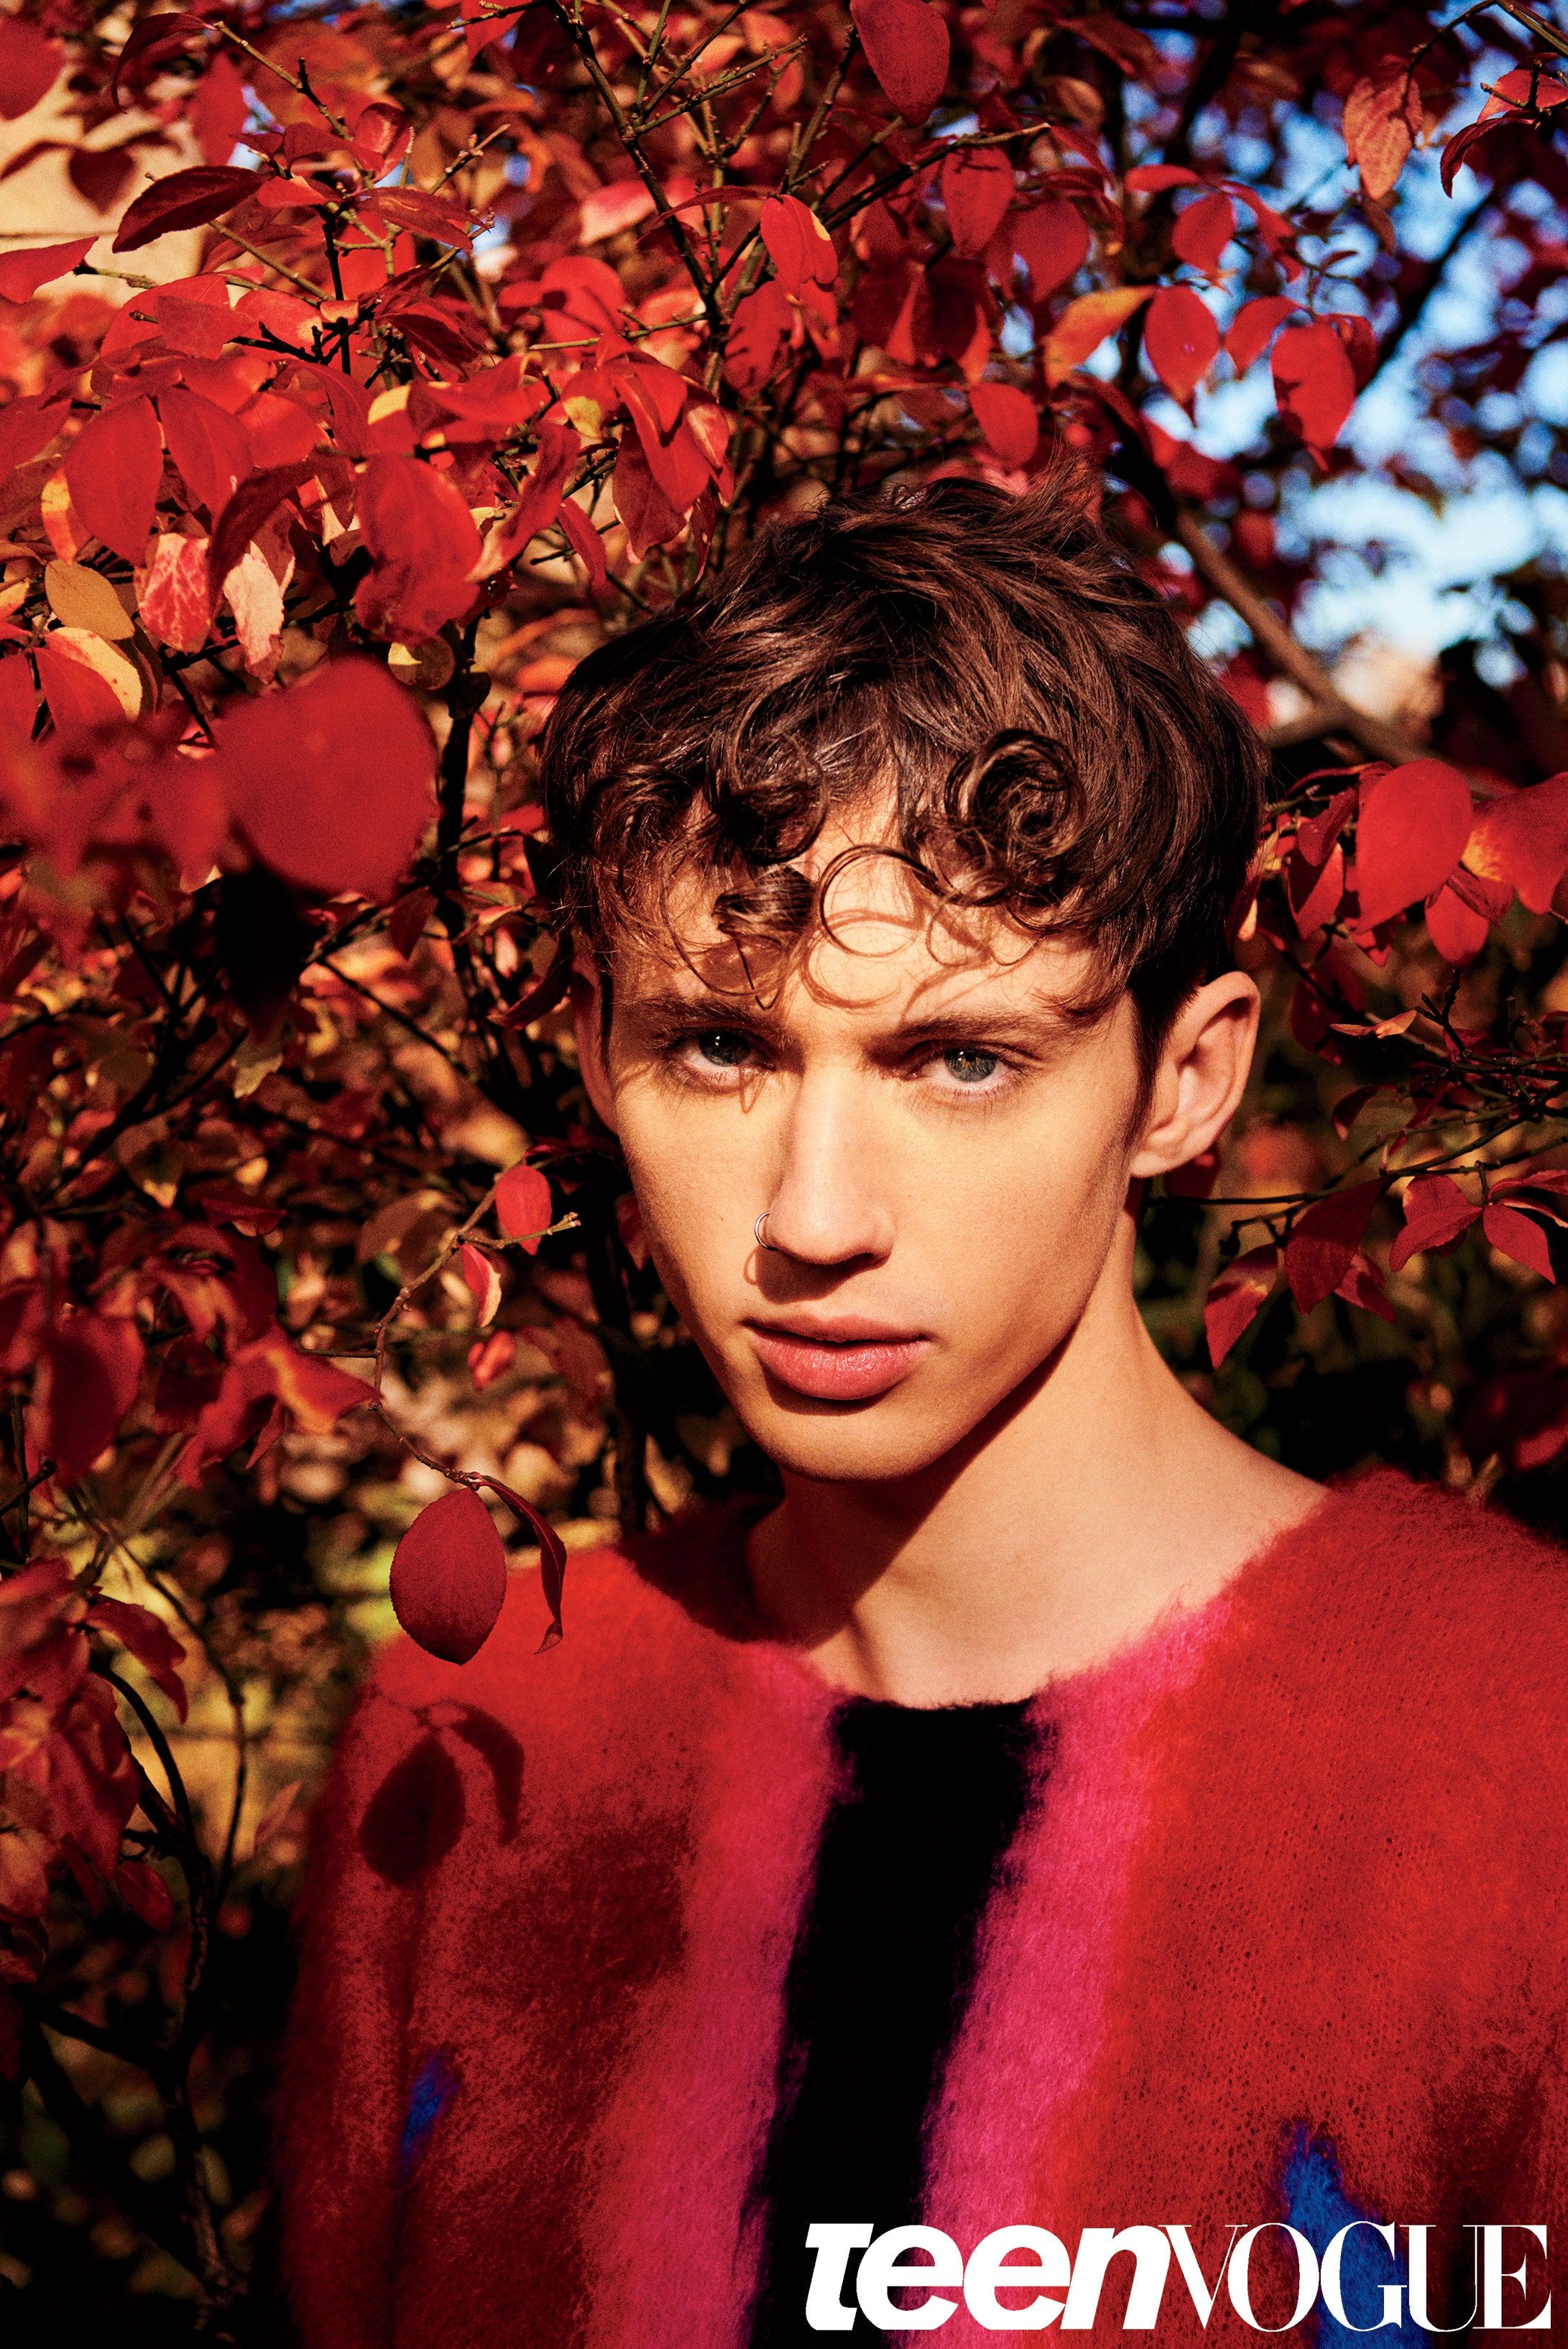 Troye Sivan's Cover Interview: Being Gay in Trump's America